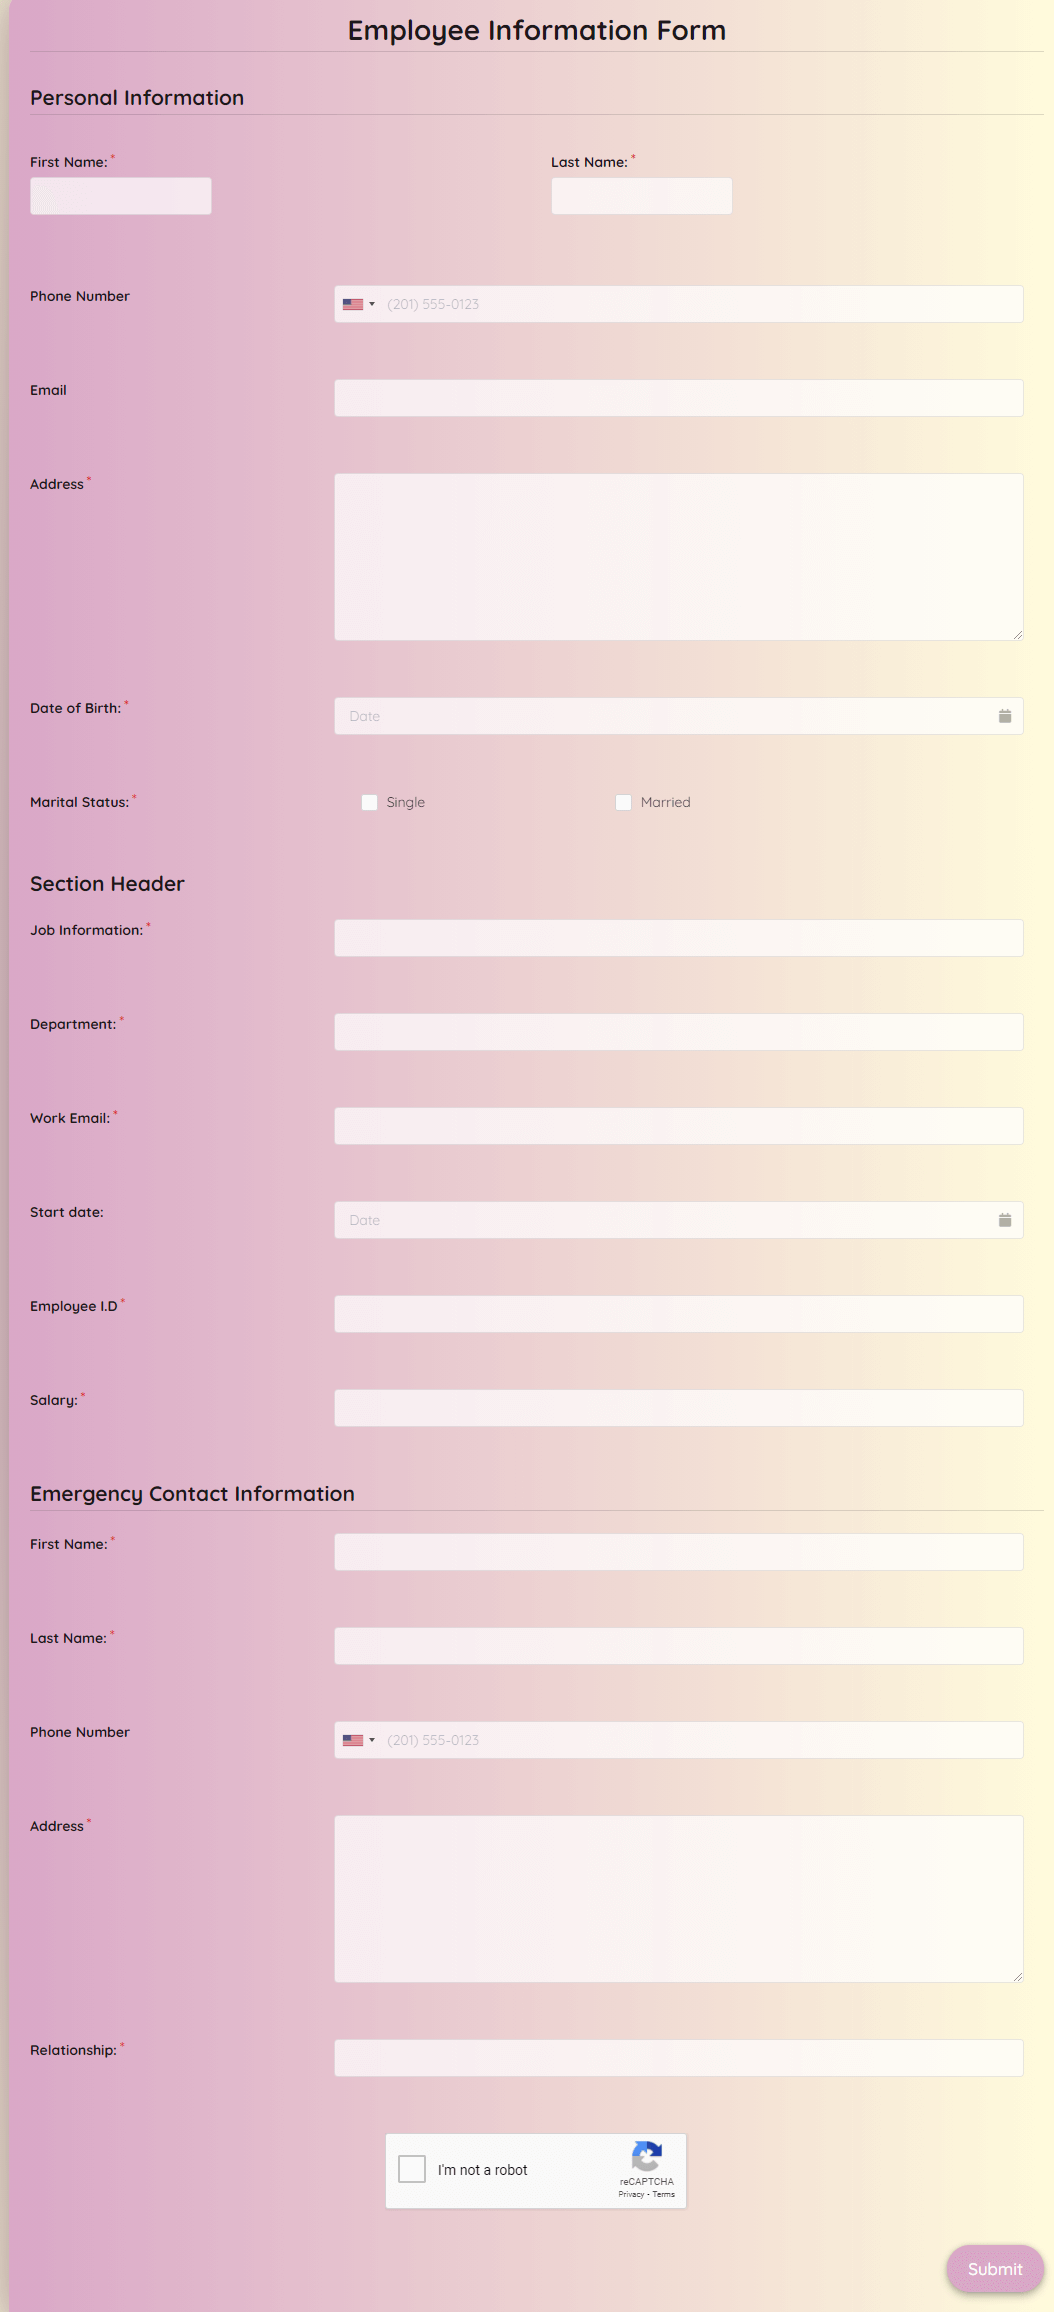 personal information form for employees